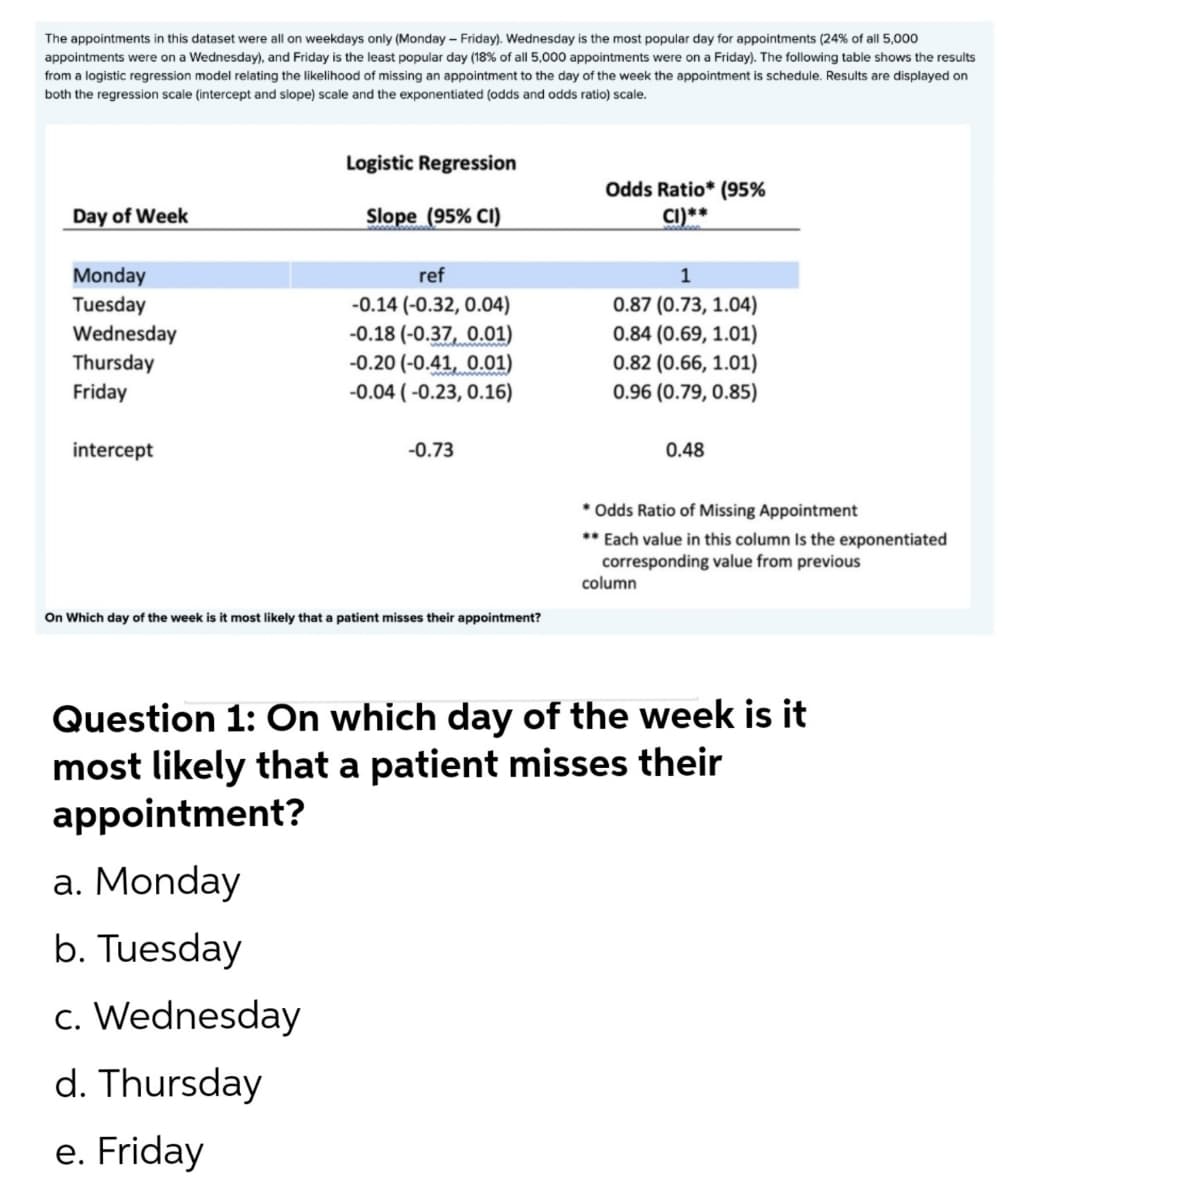 The appointments in this dataset were all on weekdays only (Monday - Friday). Wednesday is the most popular day for appointments (24% of all 5,000
appointments were on a Wednesday), and Friday is the least popular day (18% of all 5,000 appointments were on a Friday). The following table shows the results
from a logistic regression model relating the likelihood of missing an appointment to the day of the week the appointment is schedule. Results are displayed on
both the regression scale (intercept and slope) scale and the exponentiated (odds and odds ratio) scale.
Logistic Regression
Odds Ratio* (95%
Day of Week
Slope (95% CI)
CI)**
Monday
Tuesday
ref
1
-0.14 (-0.32, 0.04)
0.87 (0.73, 1.04)
-0.18 (-0.37, 0.01)
-0.20 (-0.41, 0.01)
-0.04 ( -0.23, 0.16)
Wednesday
0.84 (0.69, 1.01)
Thursday
Friday
0.82 (0.66, 1.01)
0.96 (0.79, 0.85)
intercept
-0.73
0.48
* Odds Ratio of Missing Appointment
** Each value in this column Is the exponentiated
corresponding value from previous
column
On Which day of the week is it most likely that a patient misses their appointment?
Question 1: On which day of the week is it
most likely that a patient misses their
appointment?
a. Monday
b. Tuesday
c. Wednesday
d. Thursday
e. Friday
